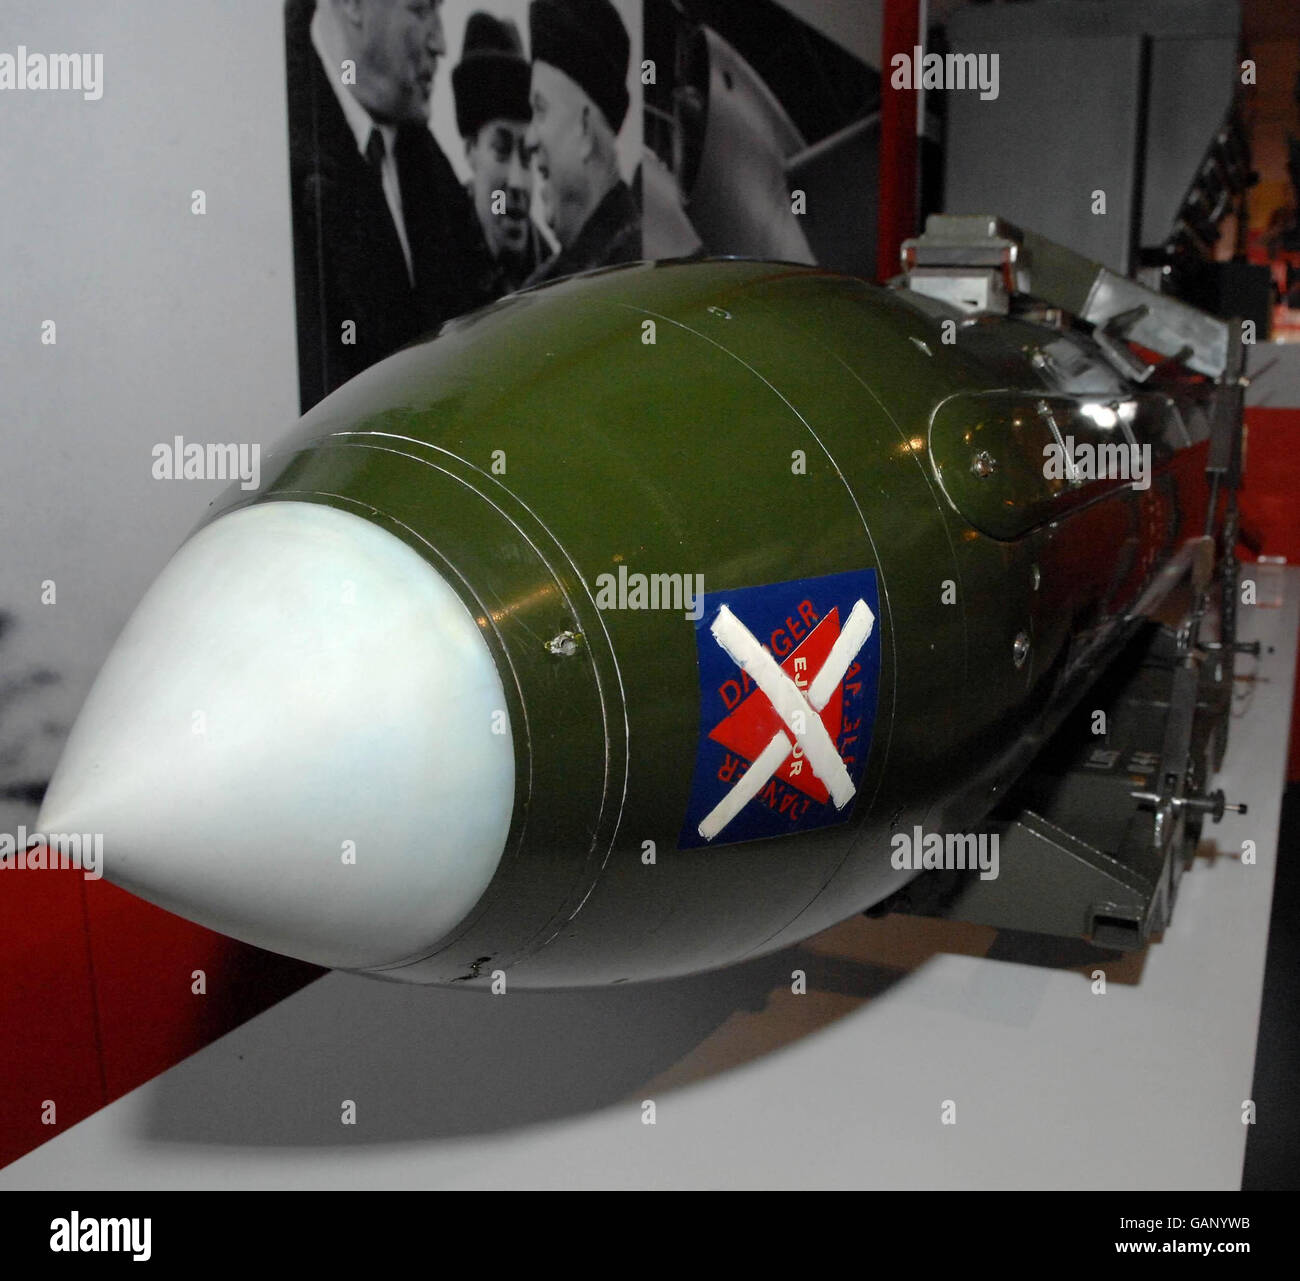 An air-launched nuclear bomb on display at the new Dan Dare and the Birth of Hi-tech Britain exhibition, which opened today at the Science Museum in London. Stock Photo